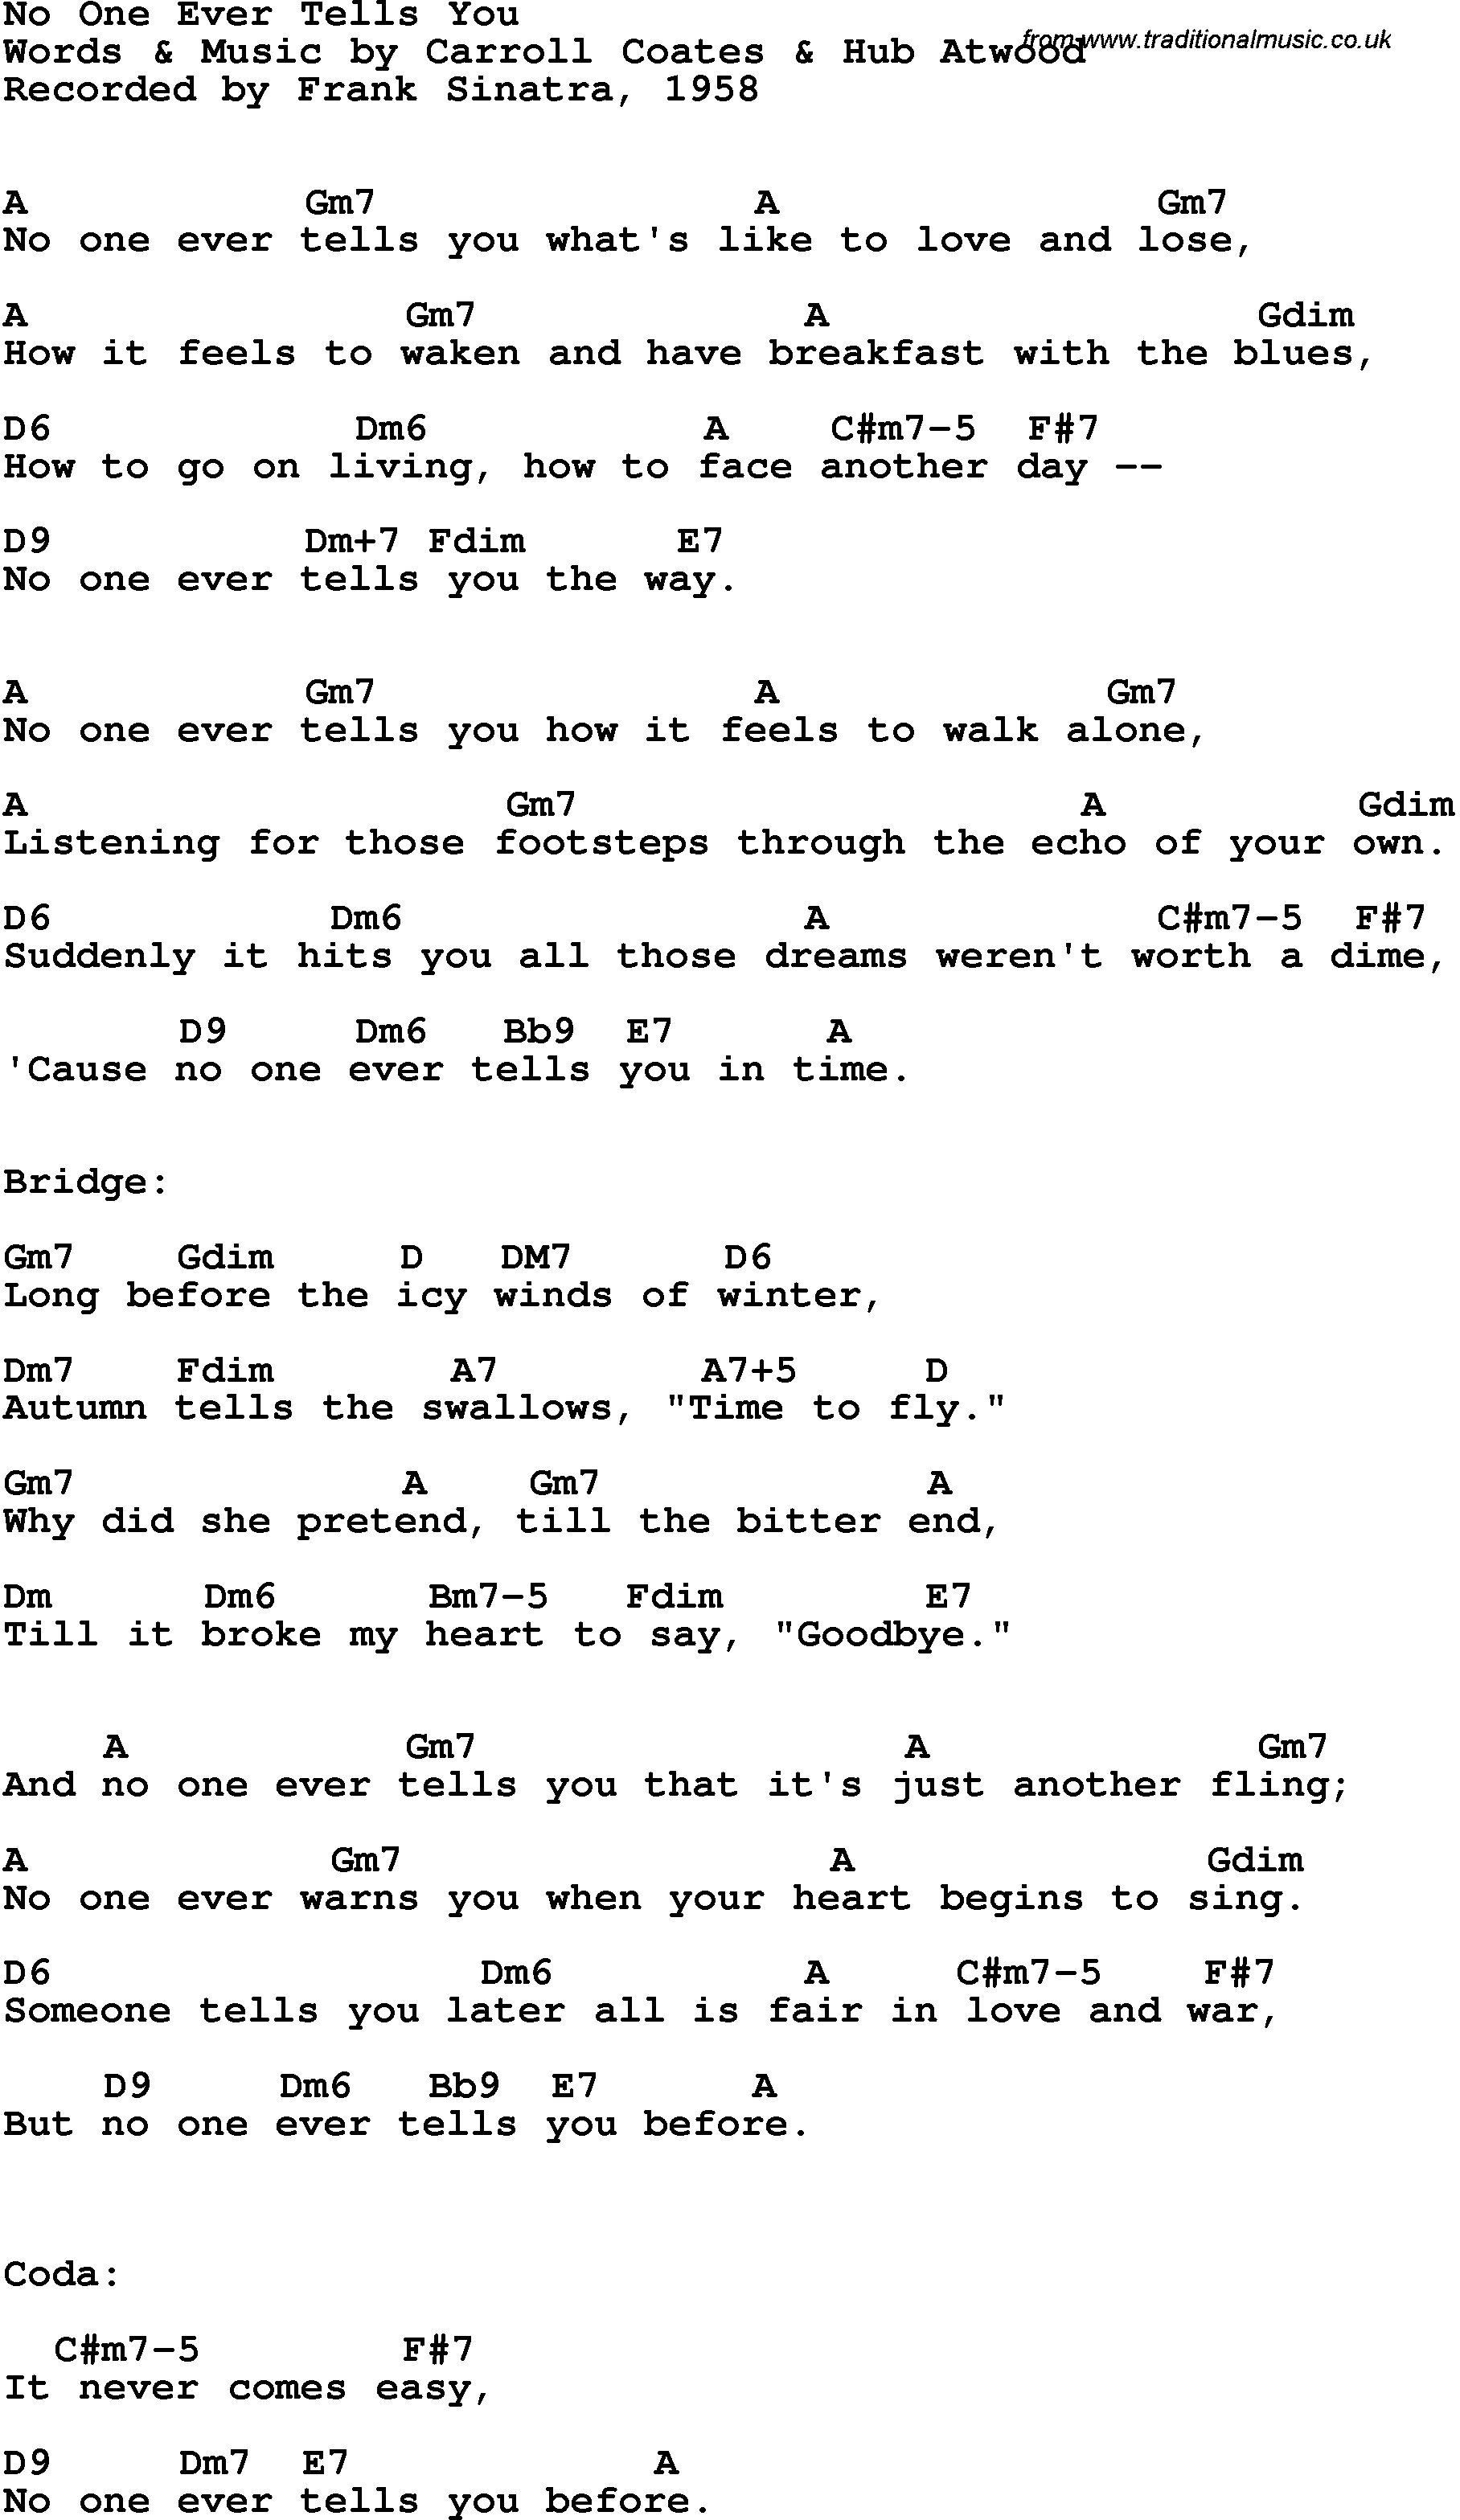 Song Lyrics with guitar chords for No One Ever Tells You - Frank Sinatra, 1958